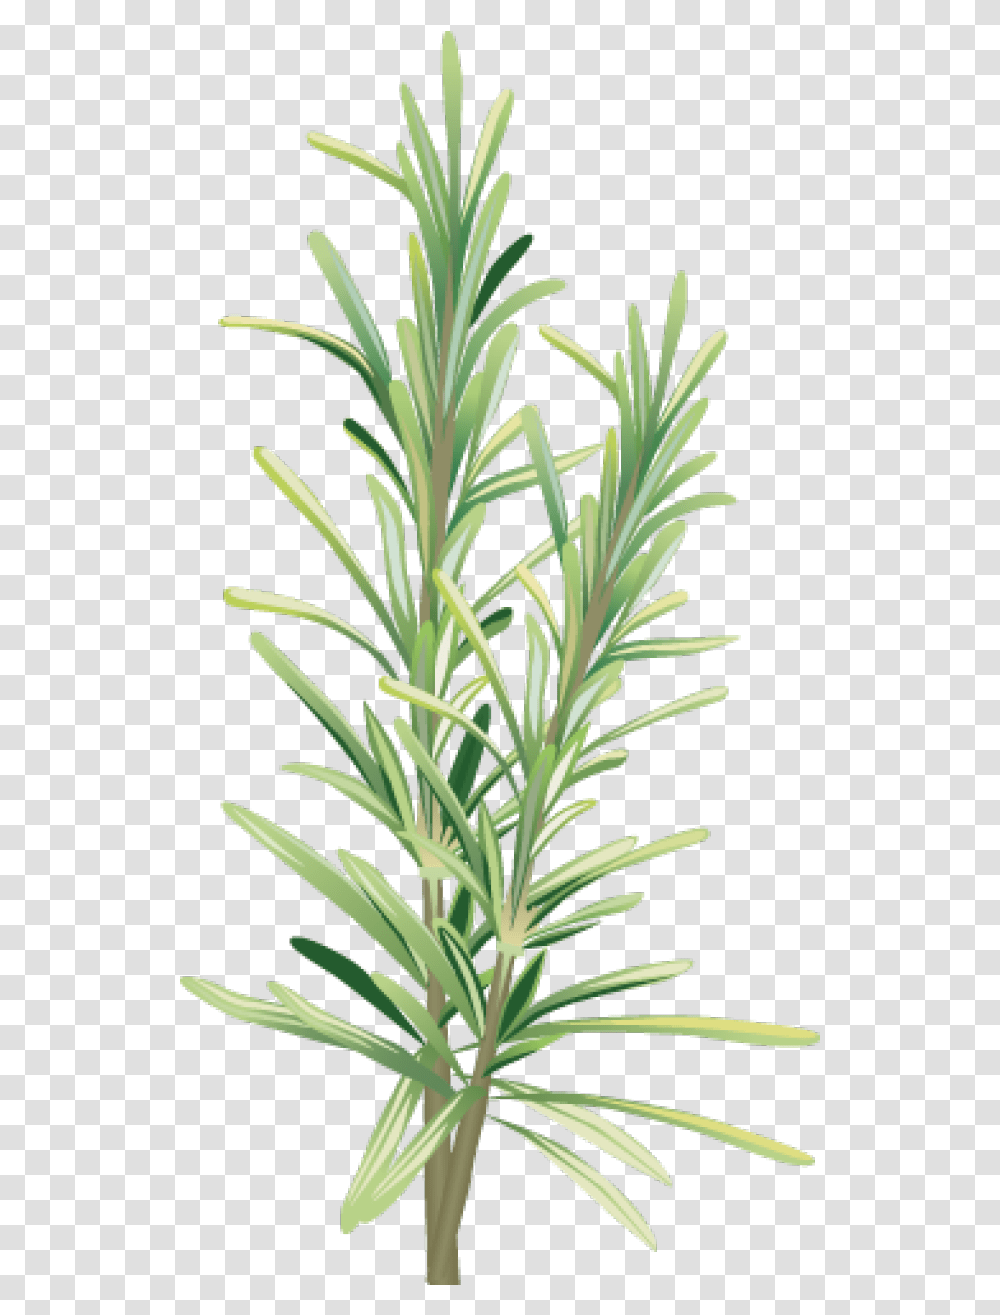 Library Of Rosemary Flower Picture Rosemary, Plant, Tree, Blossom, Leaf Transparent Png